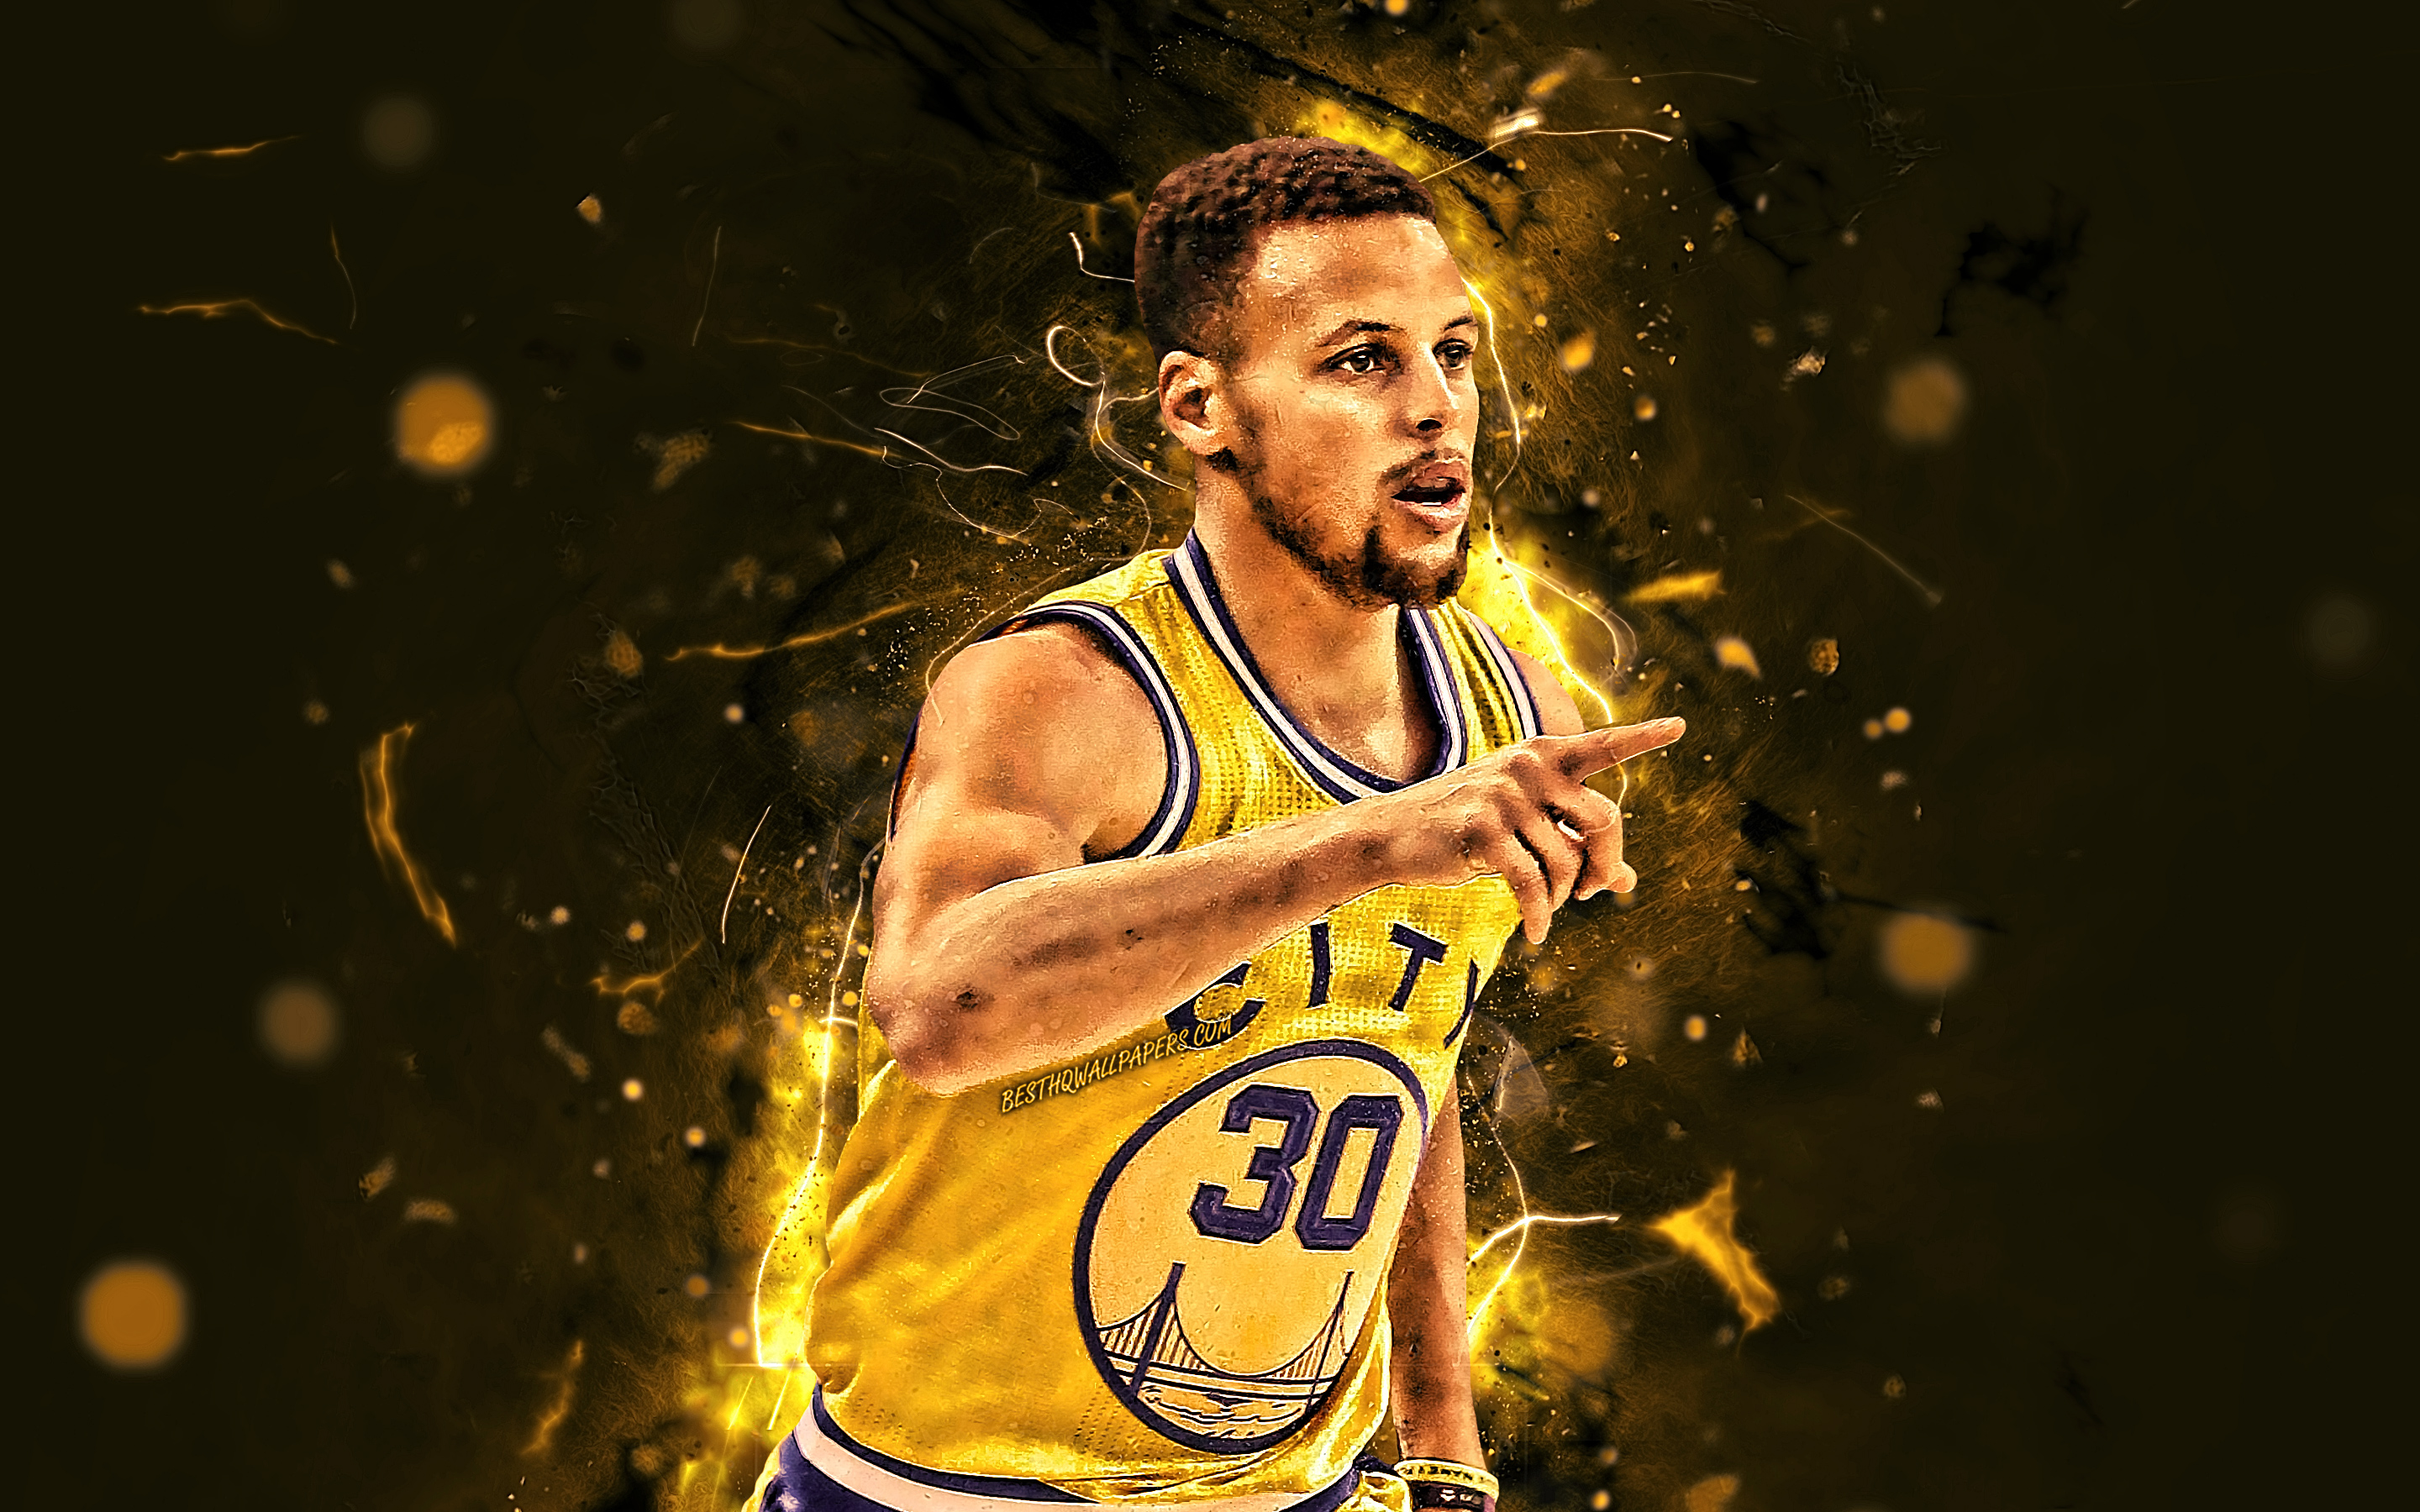 2022 Steph Curry Finals Wallpapers - Wallpaper Cave